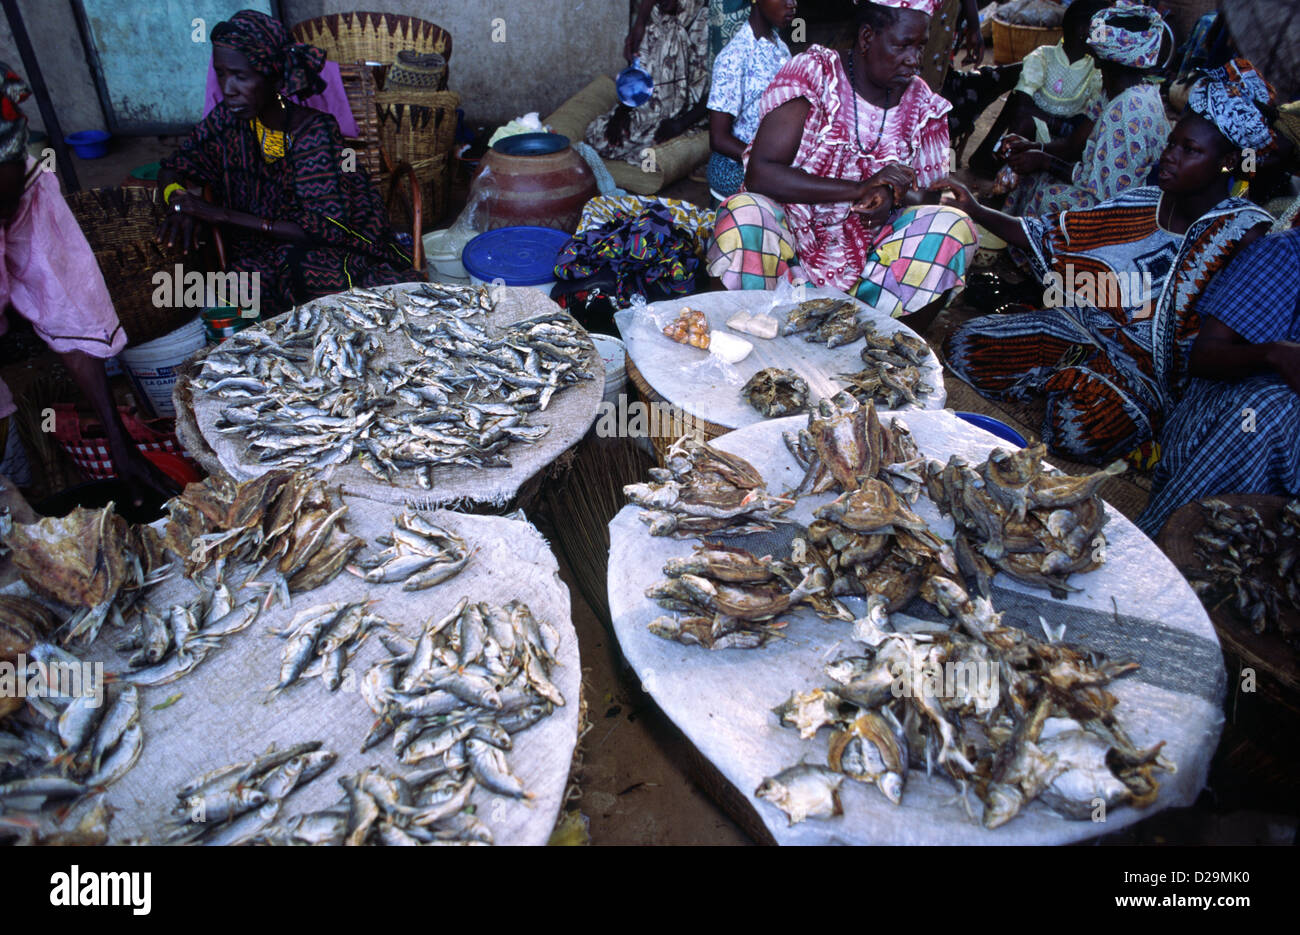 Women selling dried fish at a street market in Mali, West Africa. Stock Photo